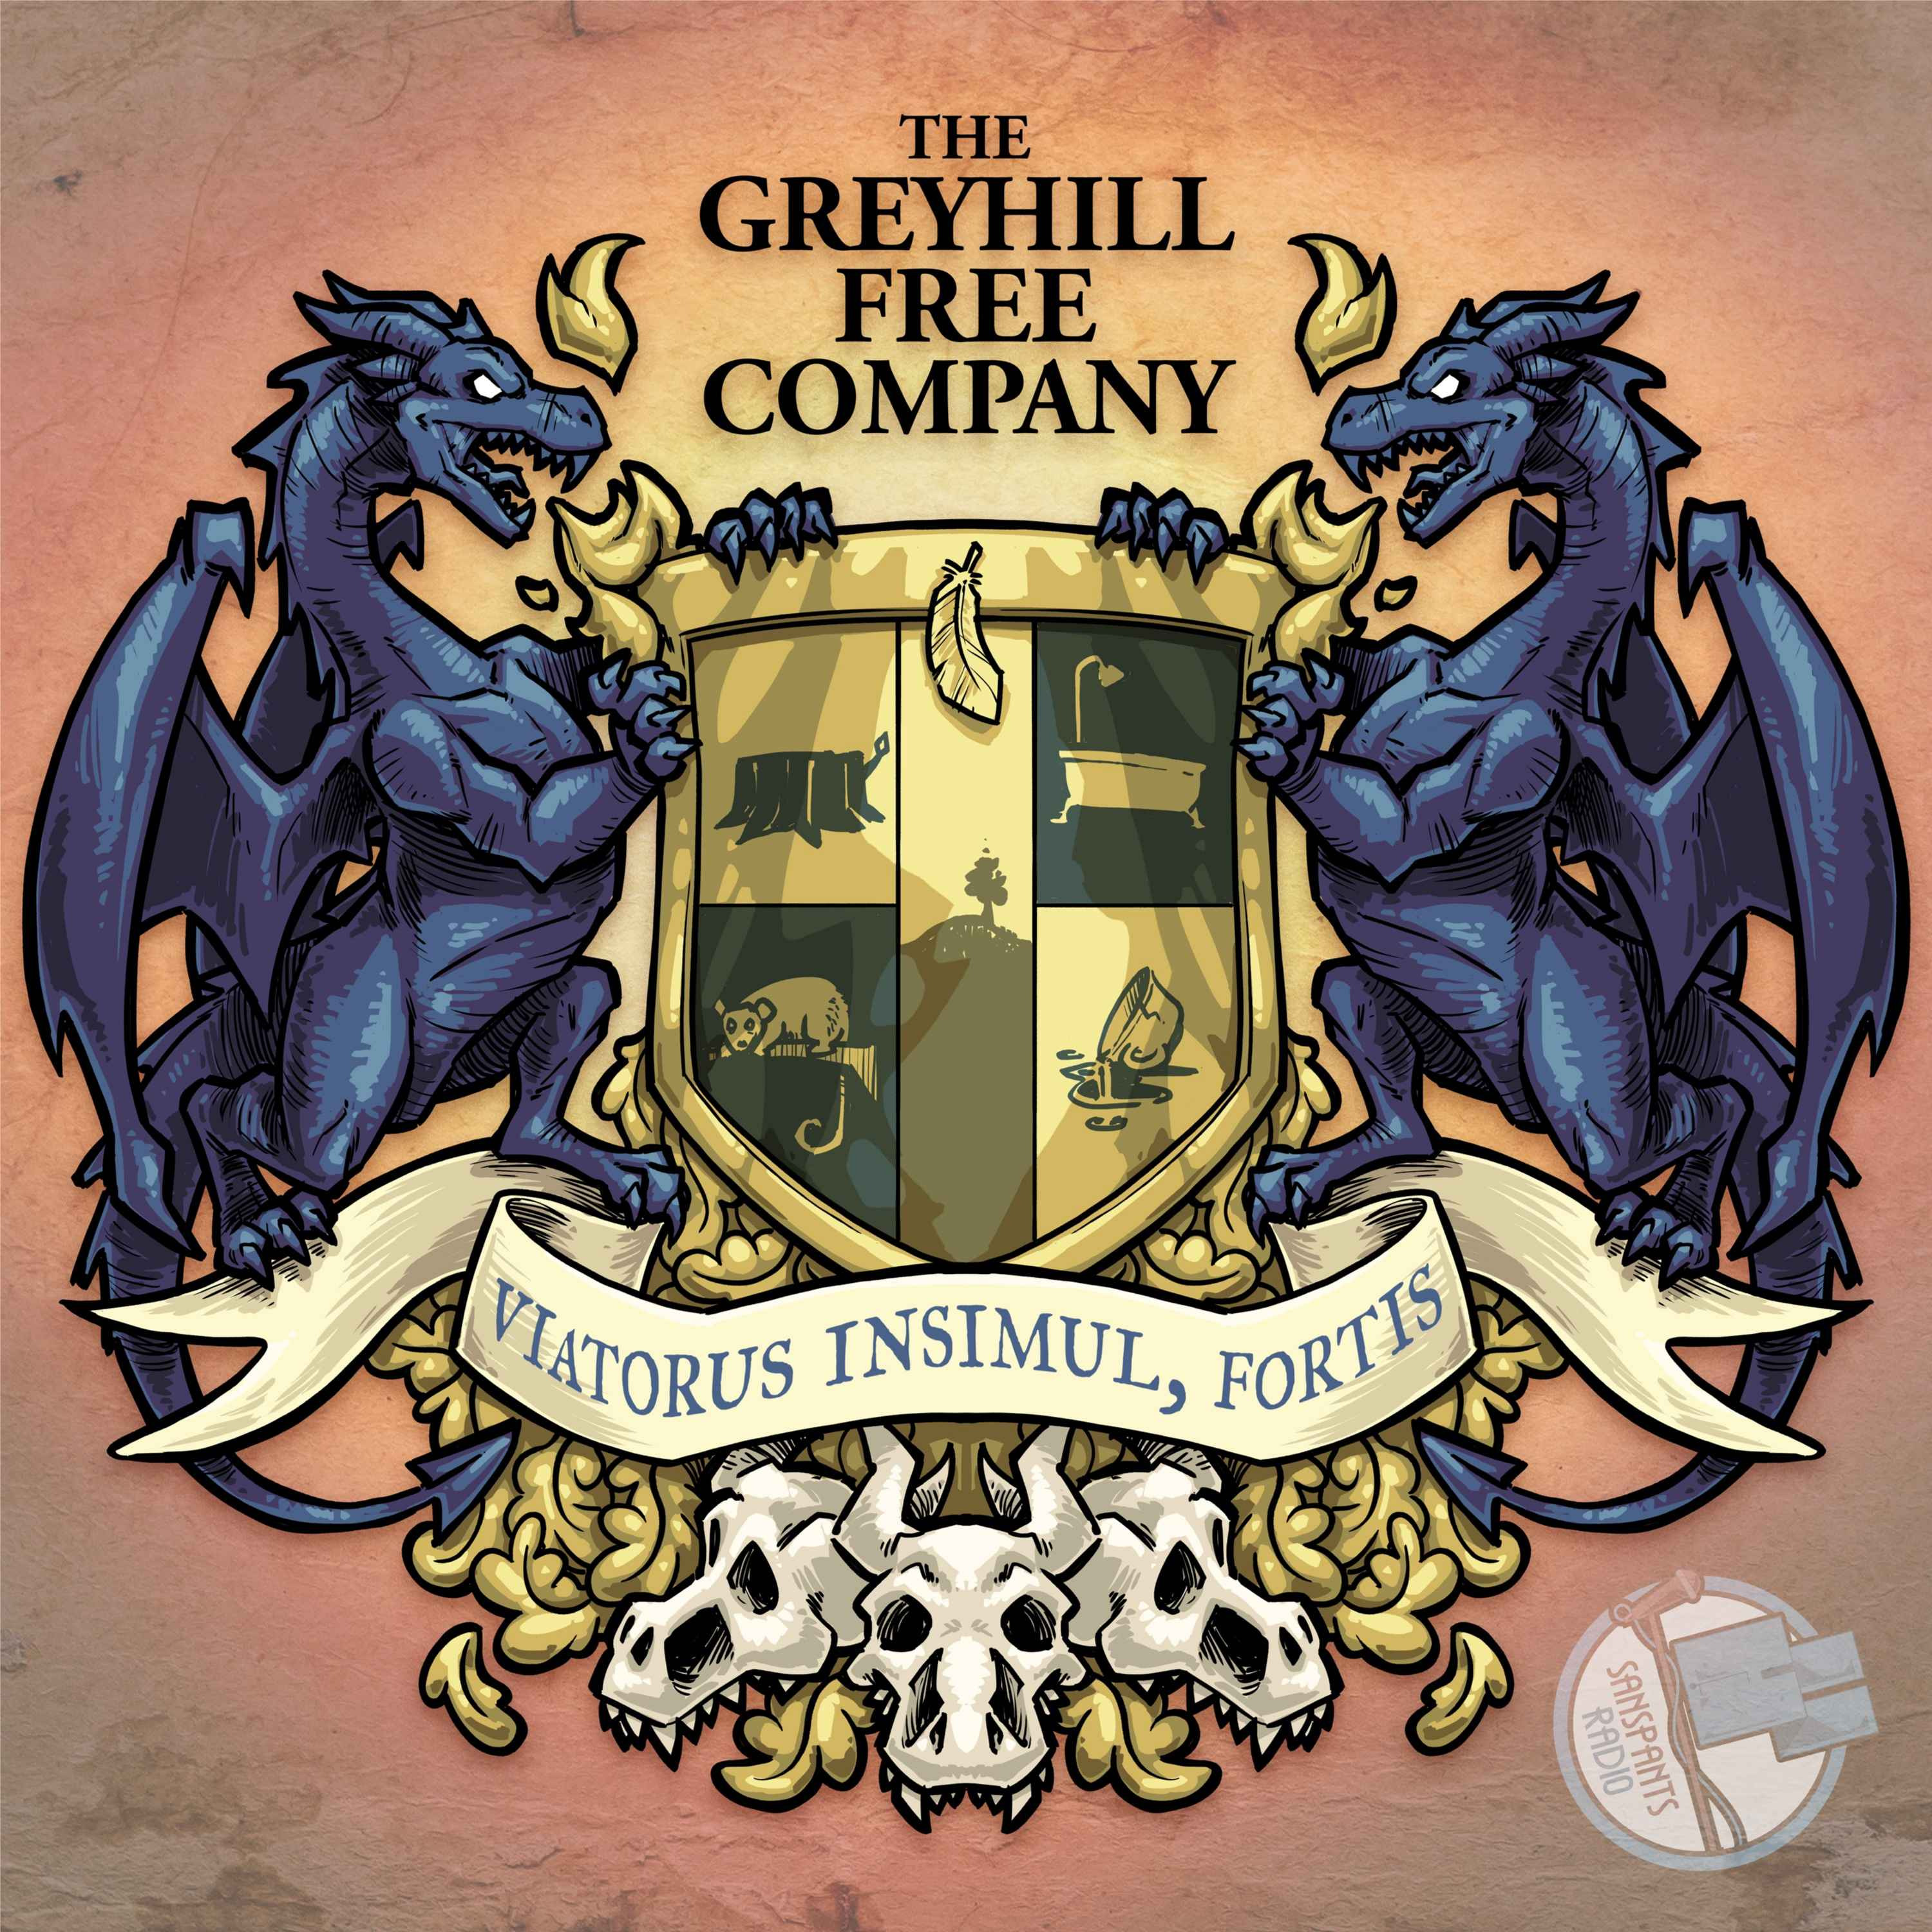 Stories of The Greyhill Free Company II #14 Conversing with Statues